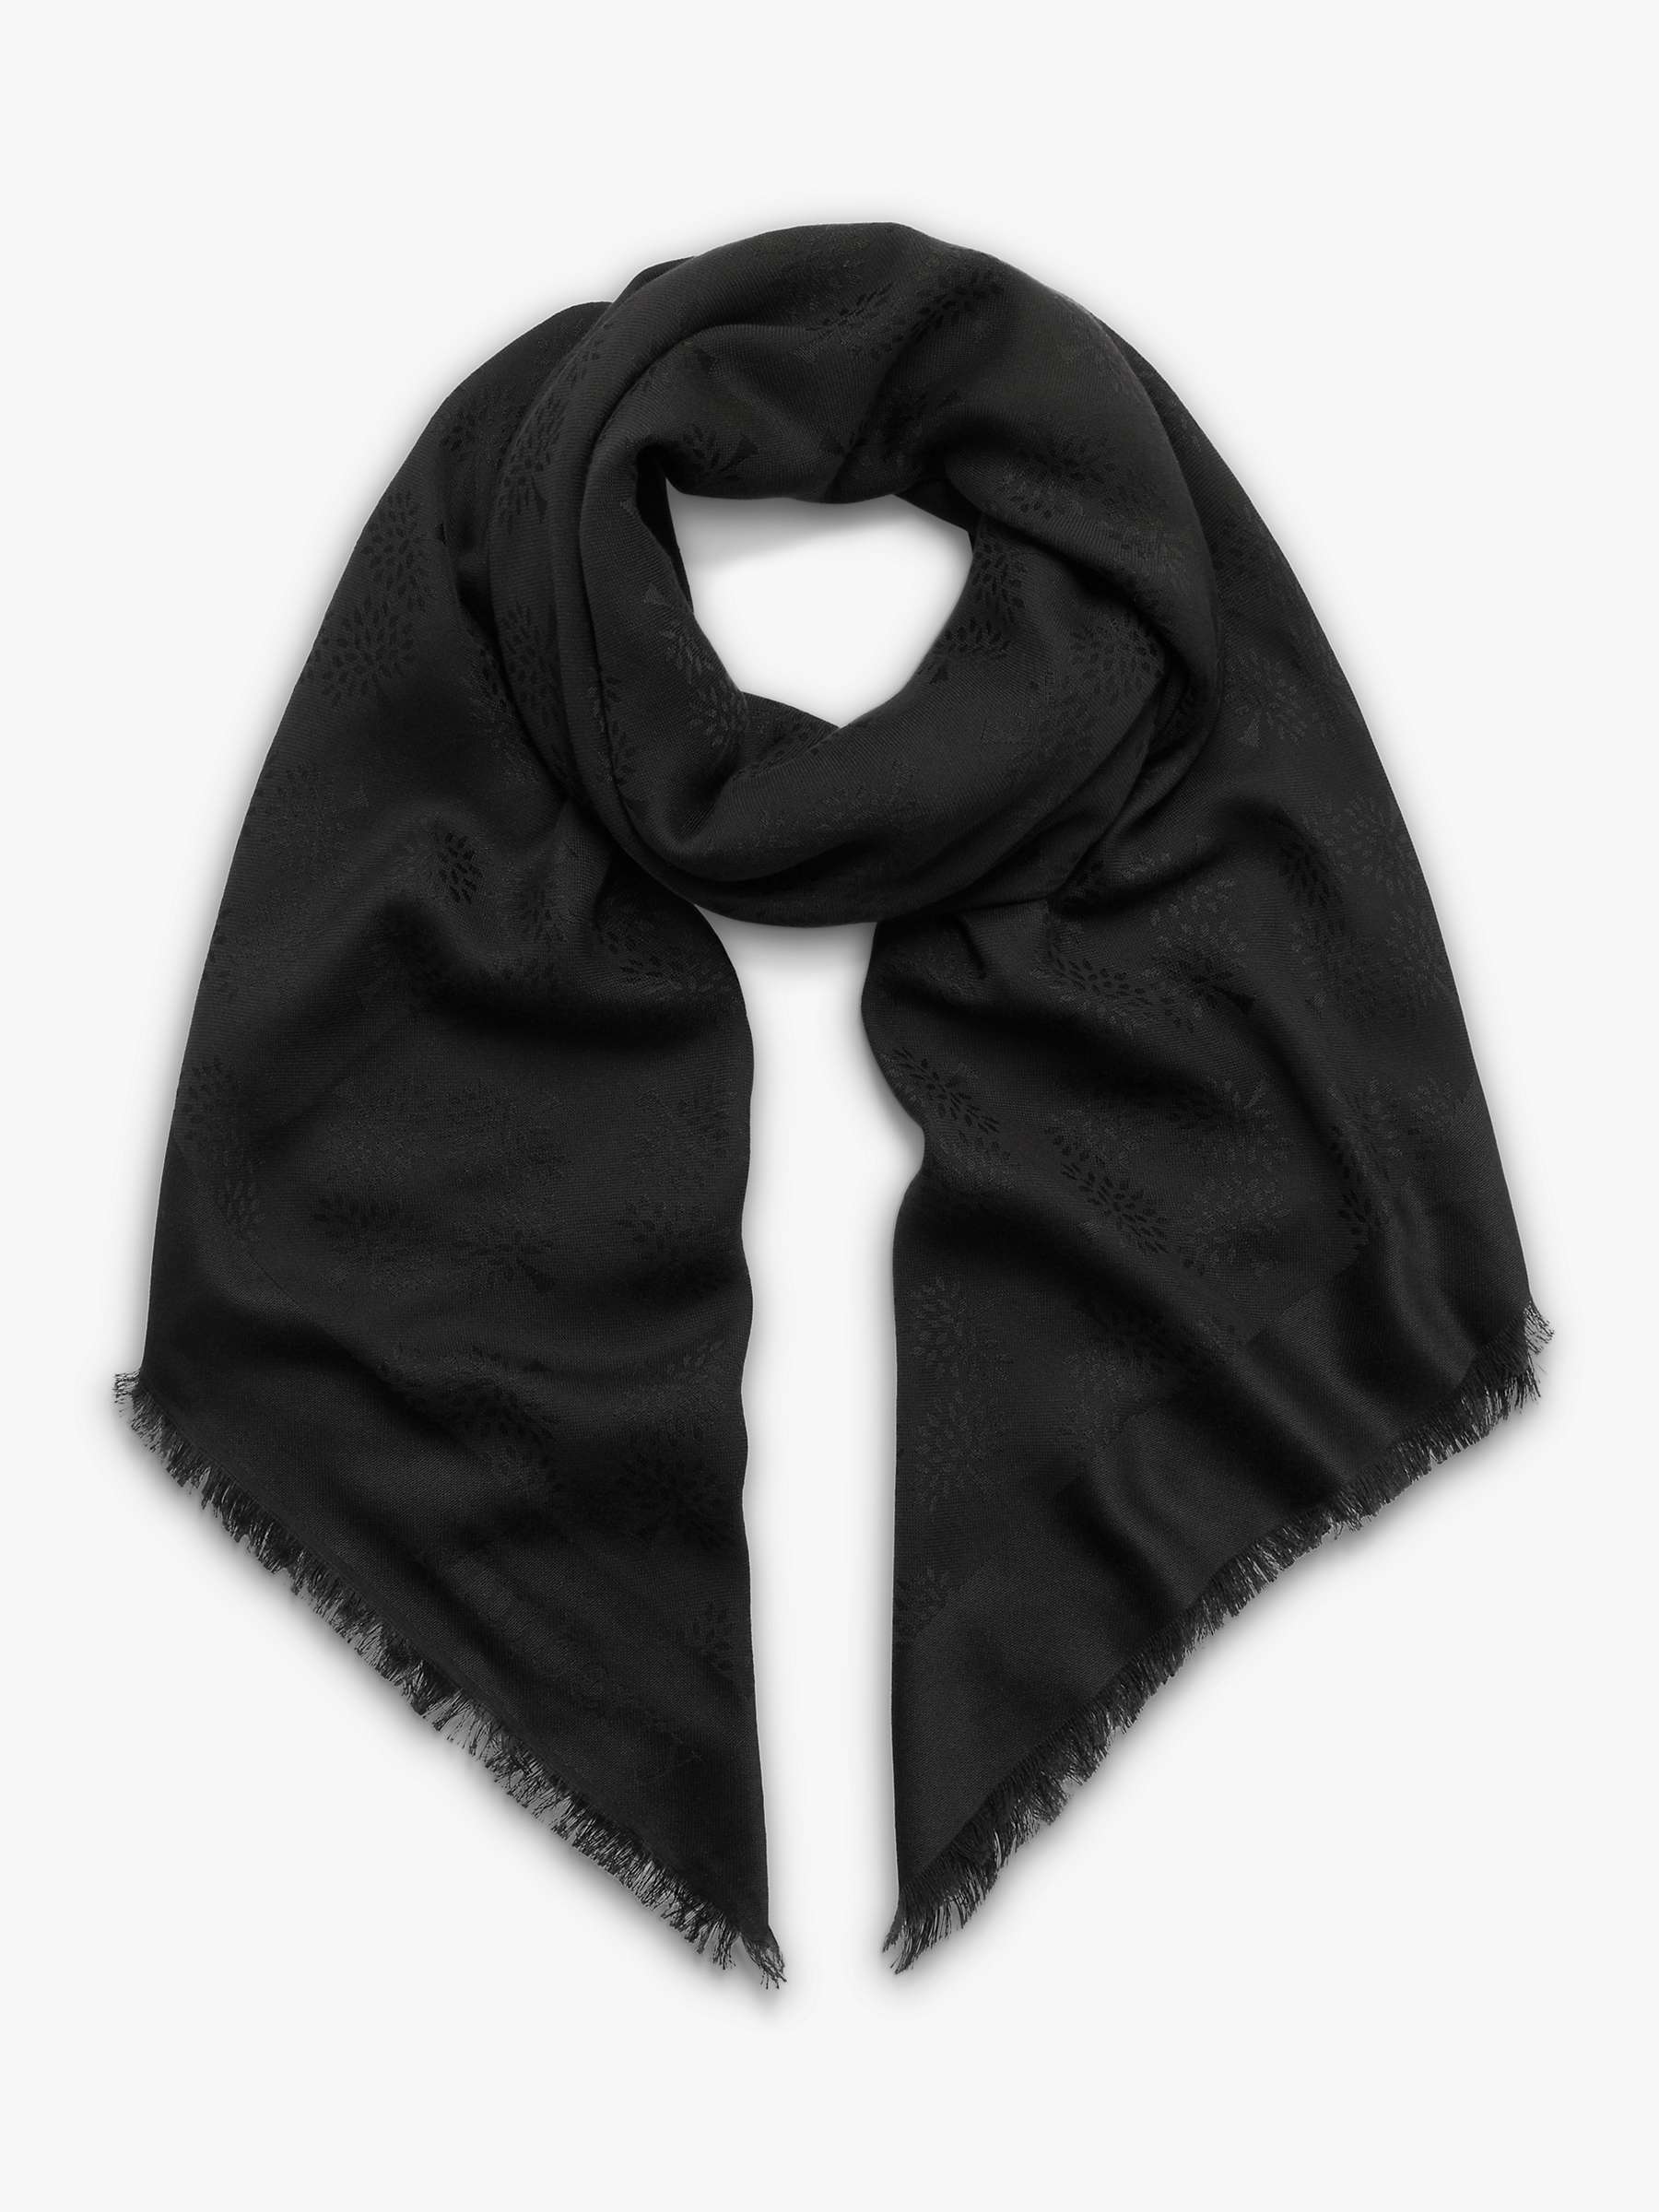 Mulberry Tree Silk Cotton Square Scarf, Black at John Lewis & Partners